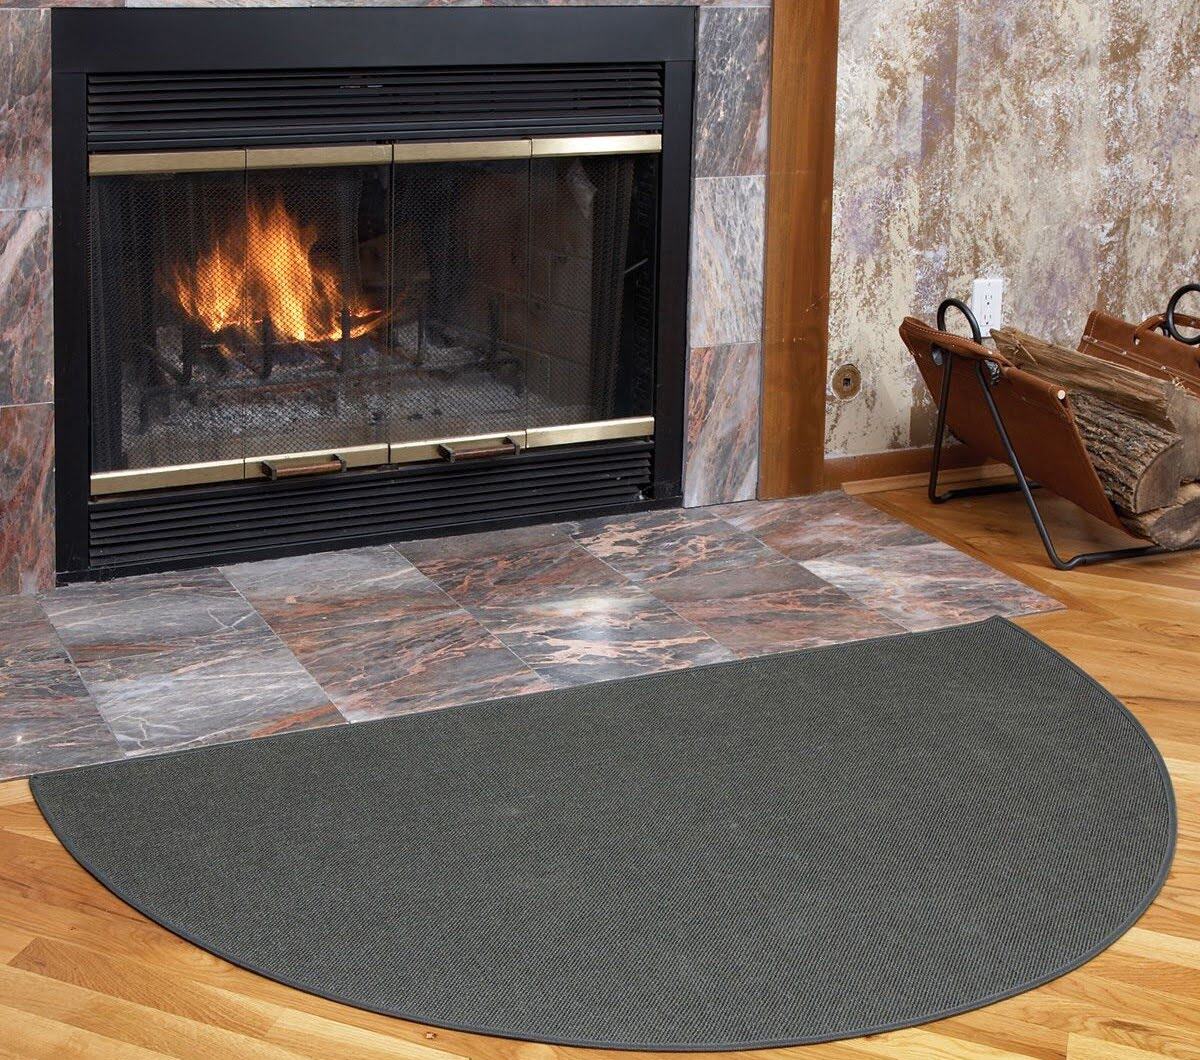 How To Know If A Rug Is Fire Resistant